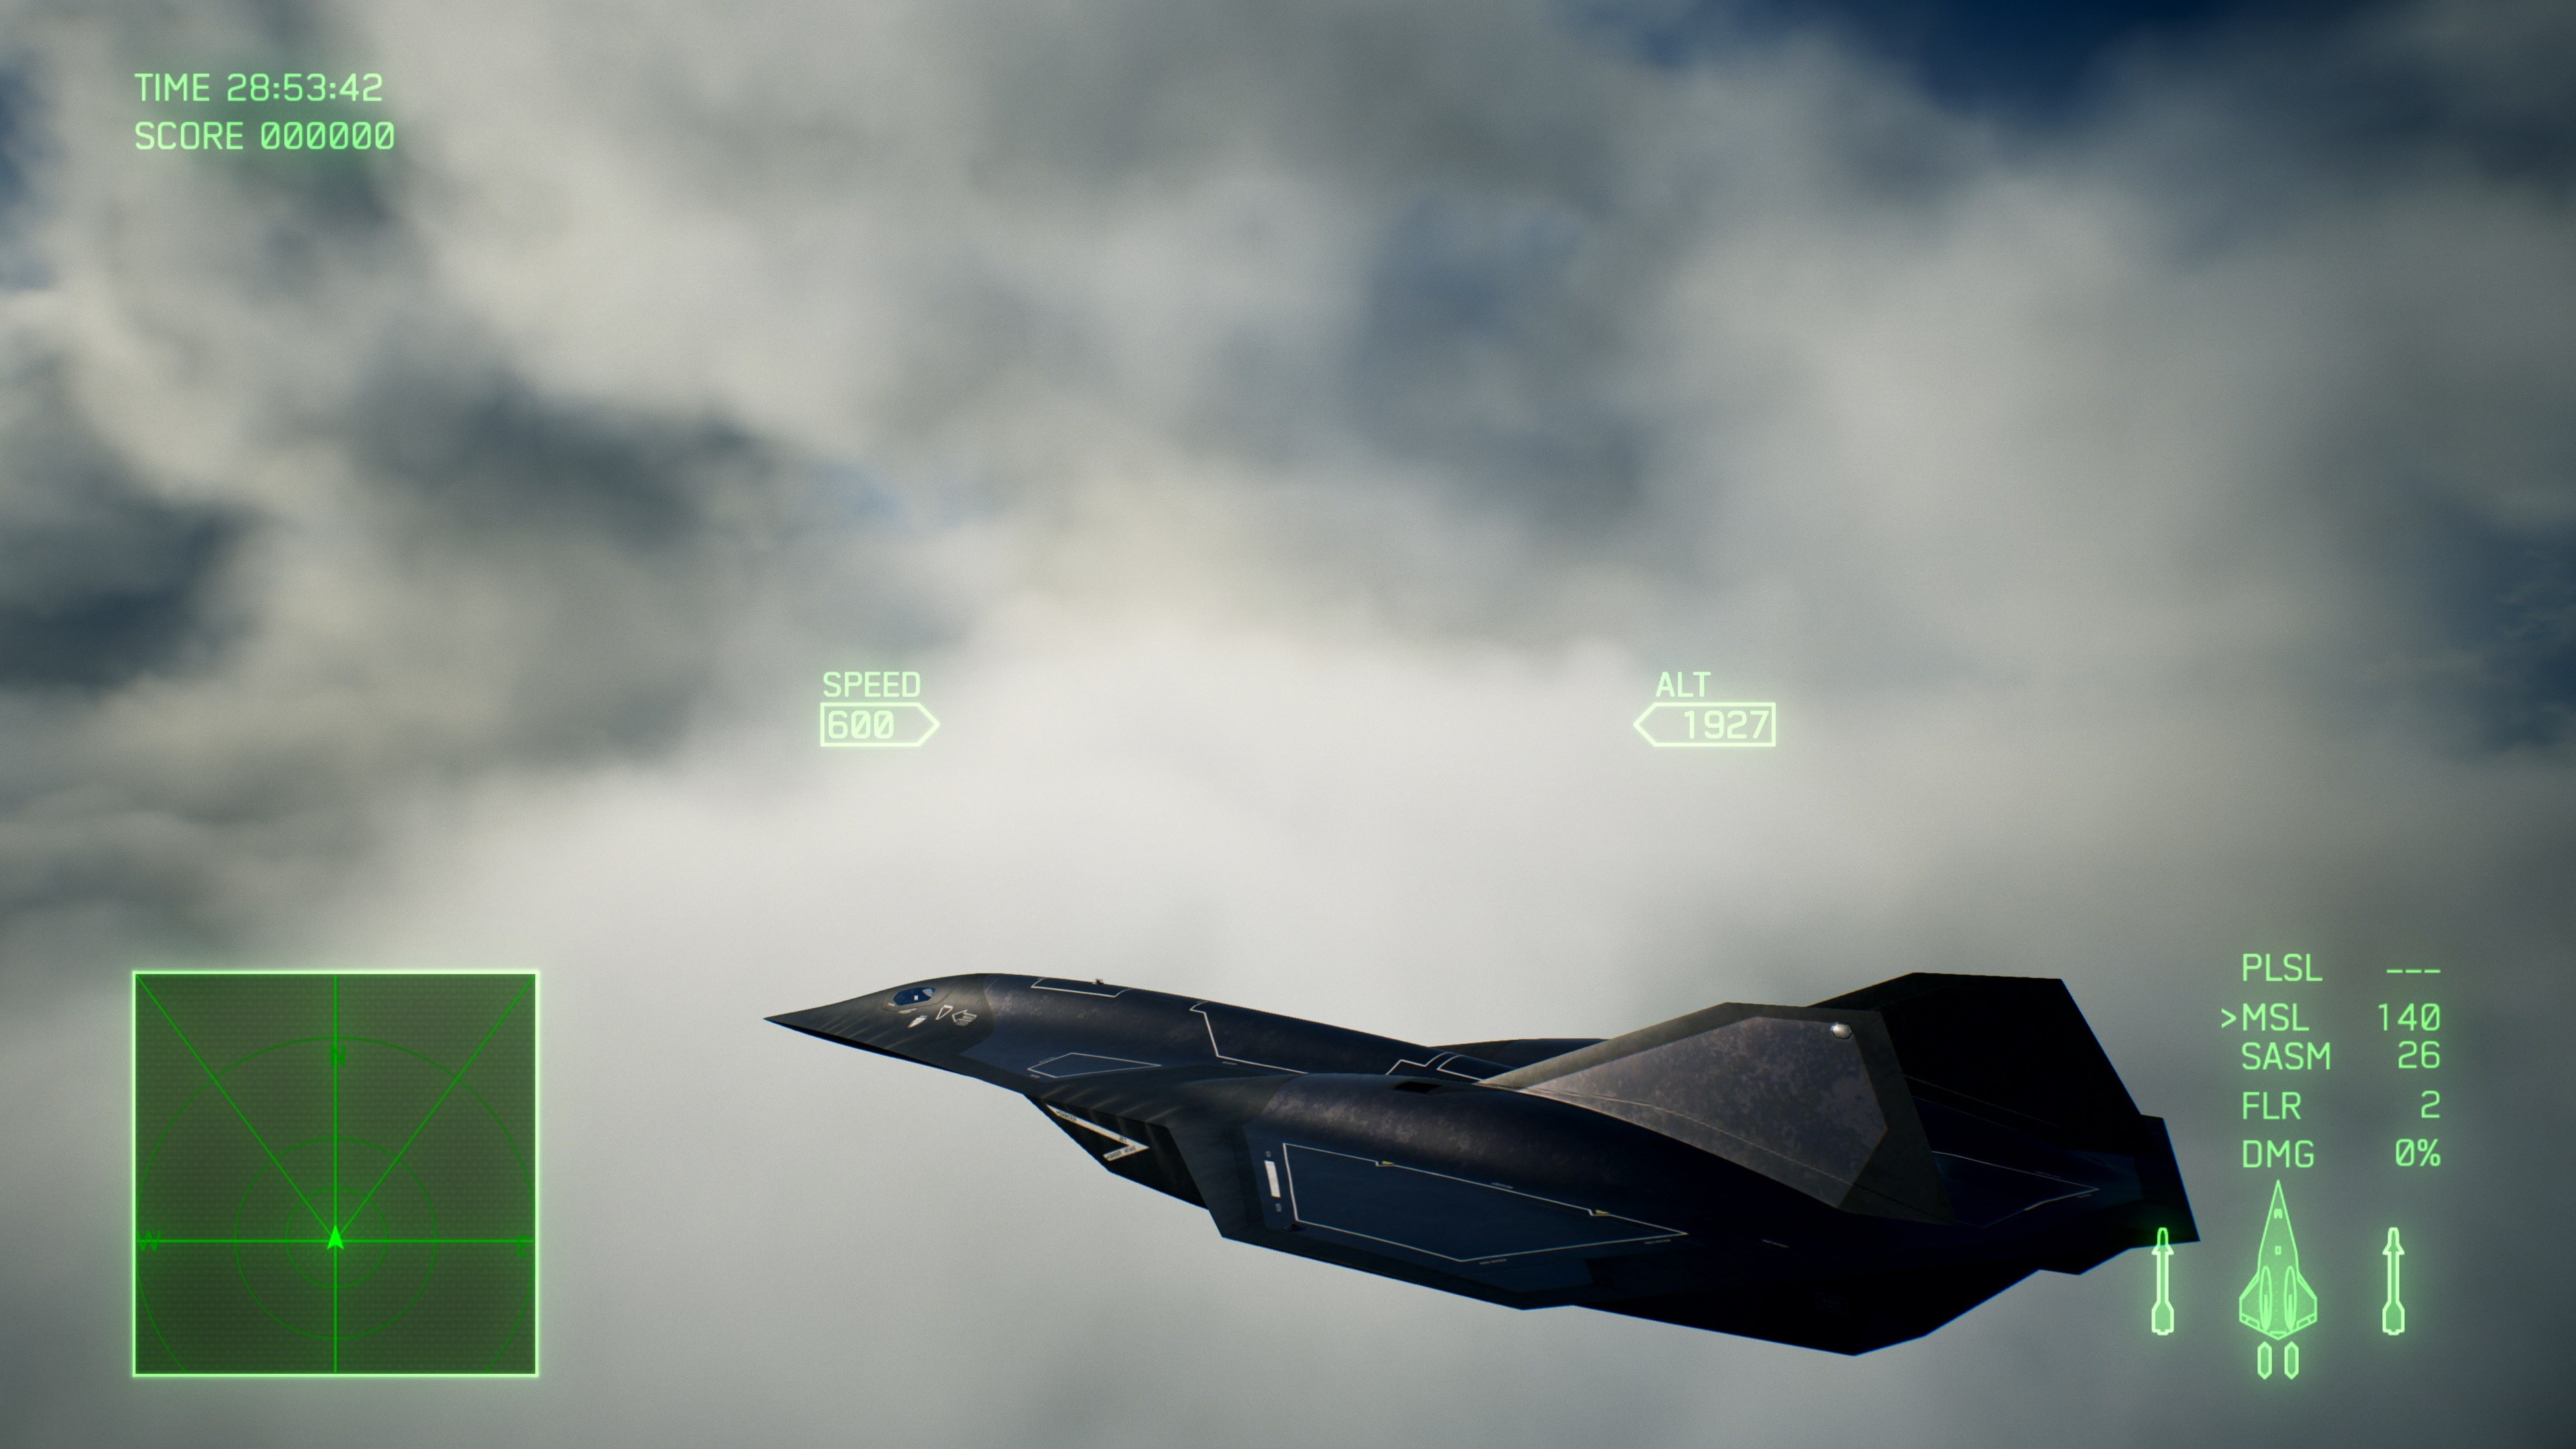 ACE COMBAT 7: SKIES UNKNOWN - TOP GUN: Maverick Ultimate Edition Steam Account